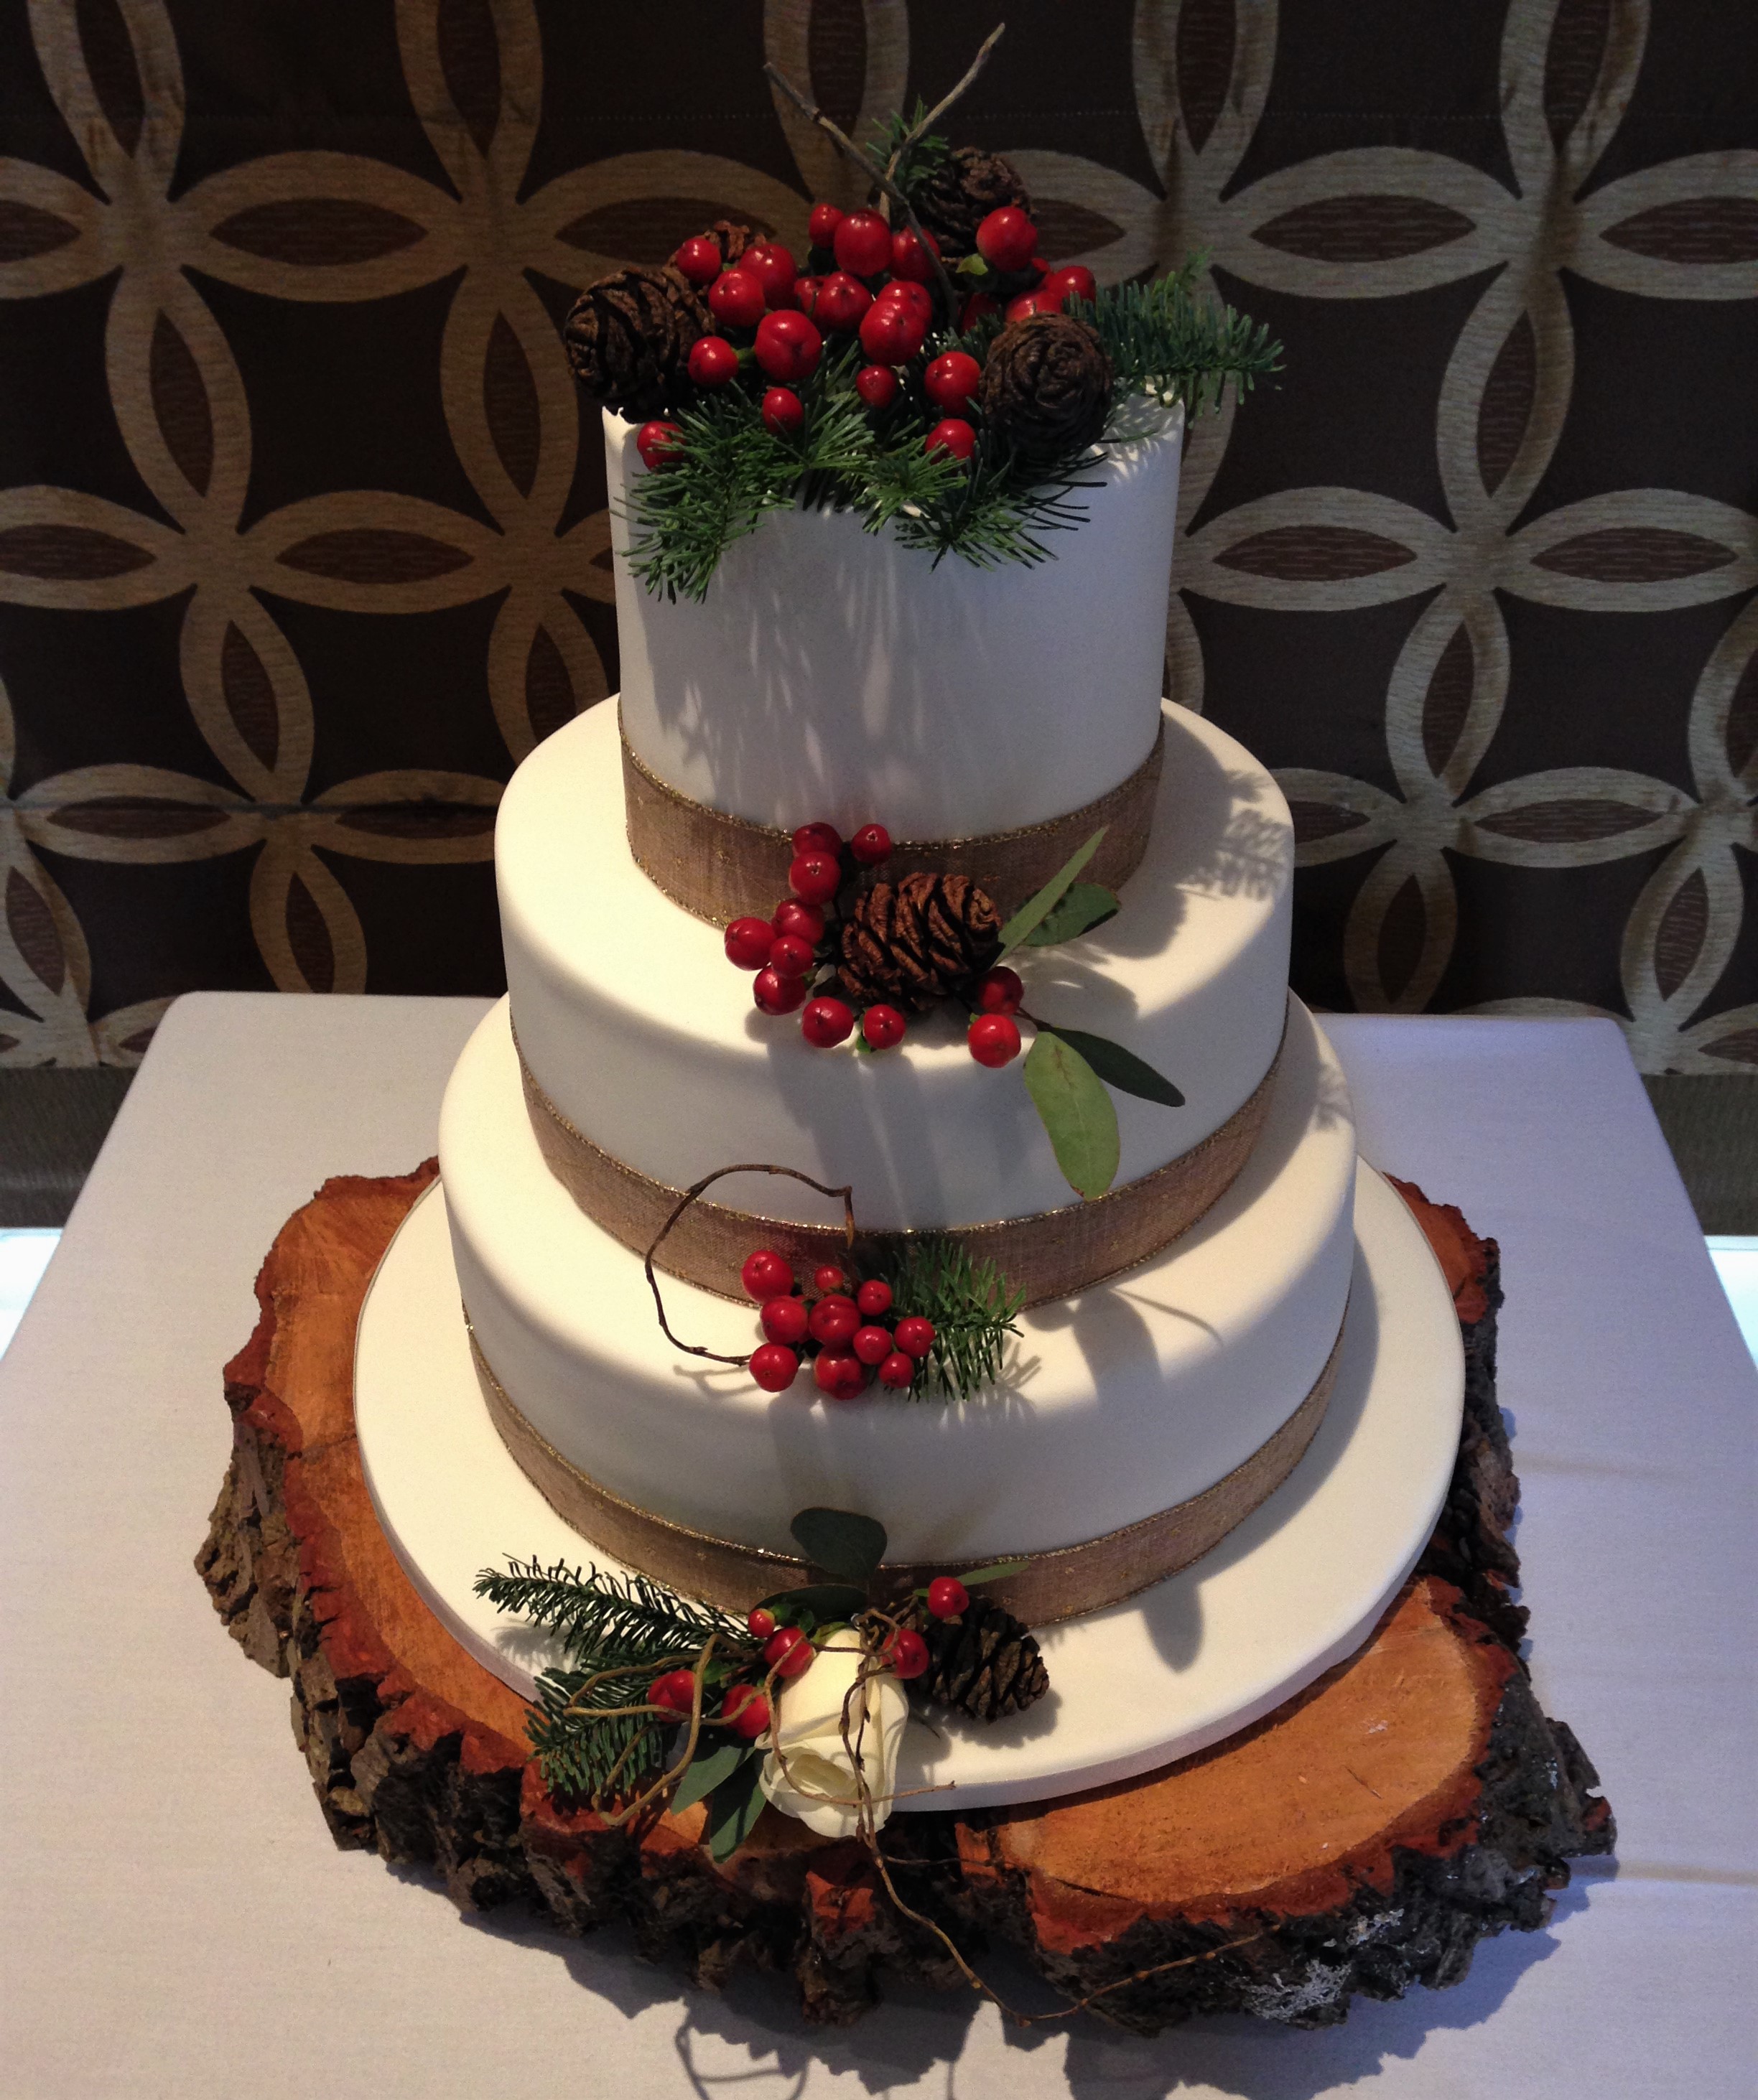 cake flowers and wooden log base for hire for a rustic feel